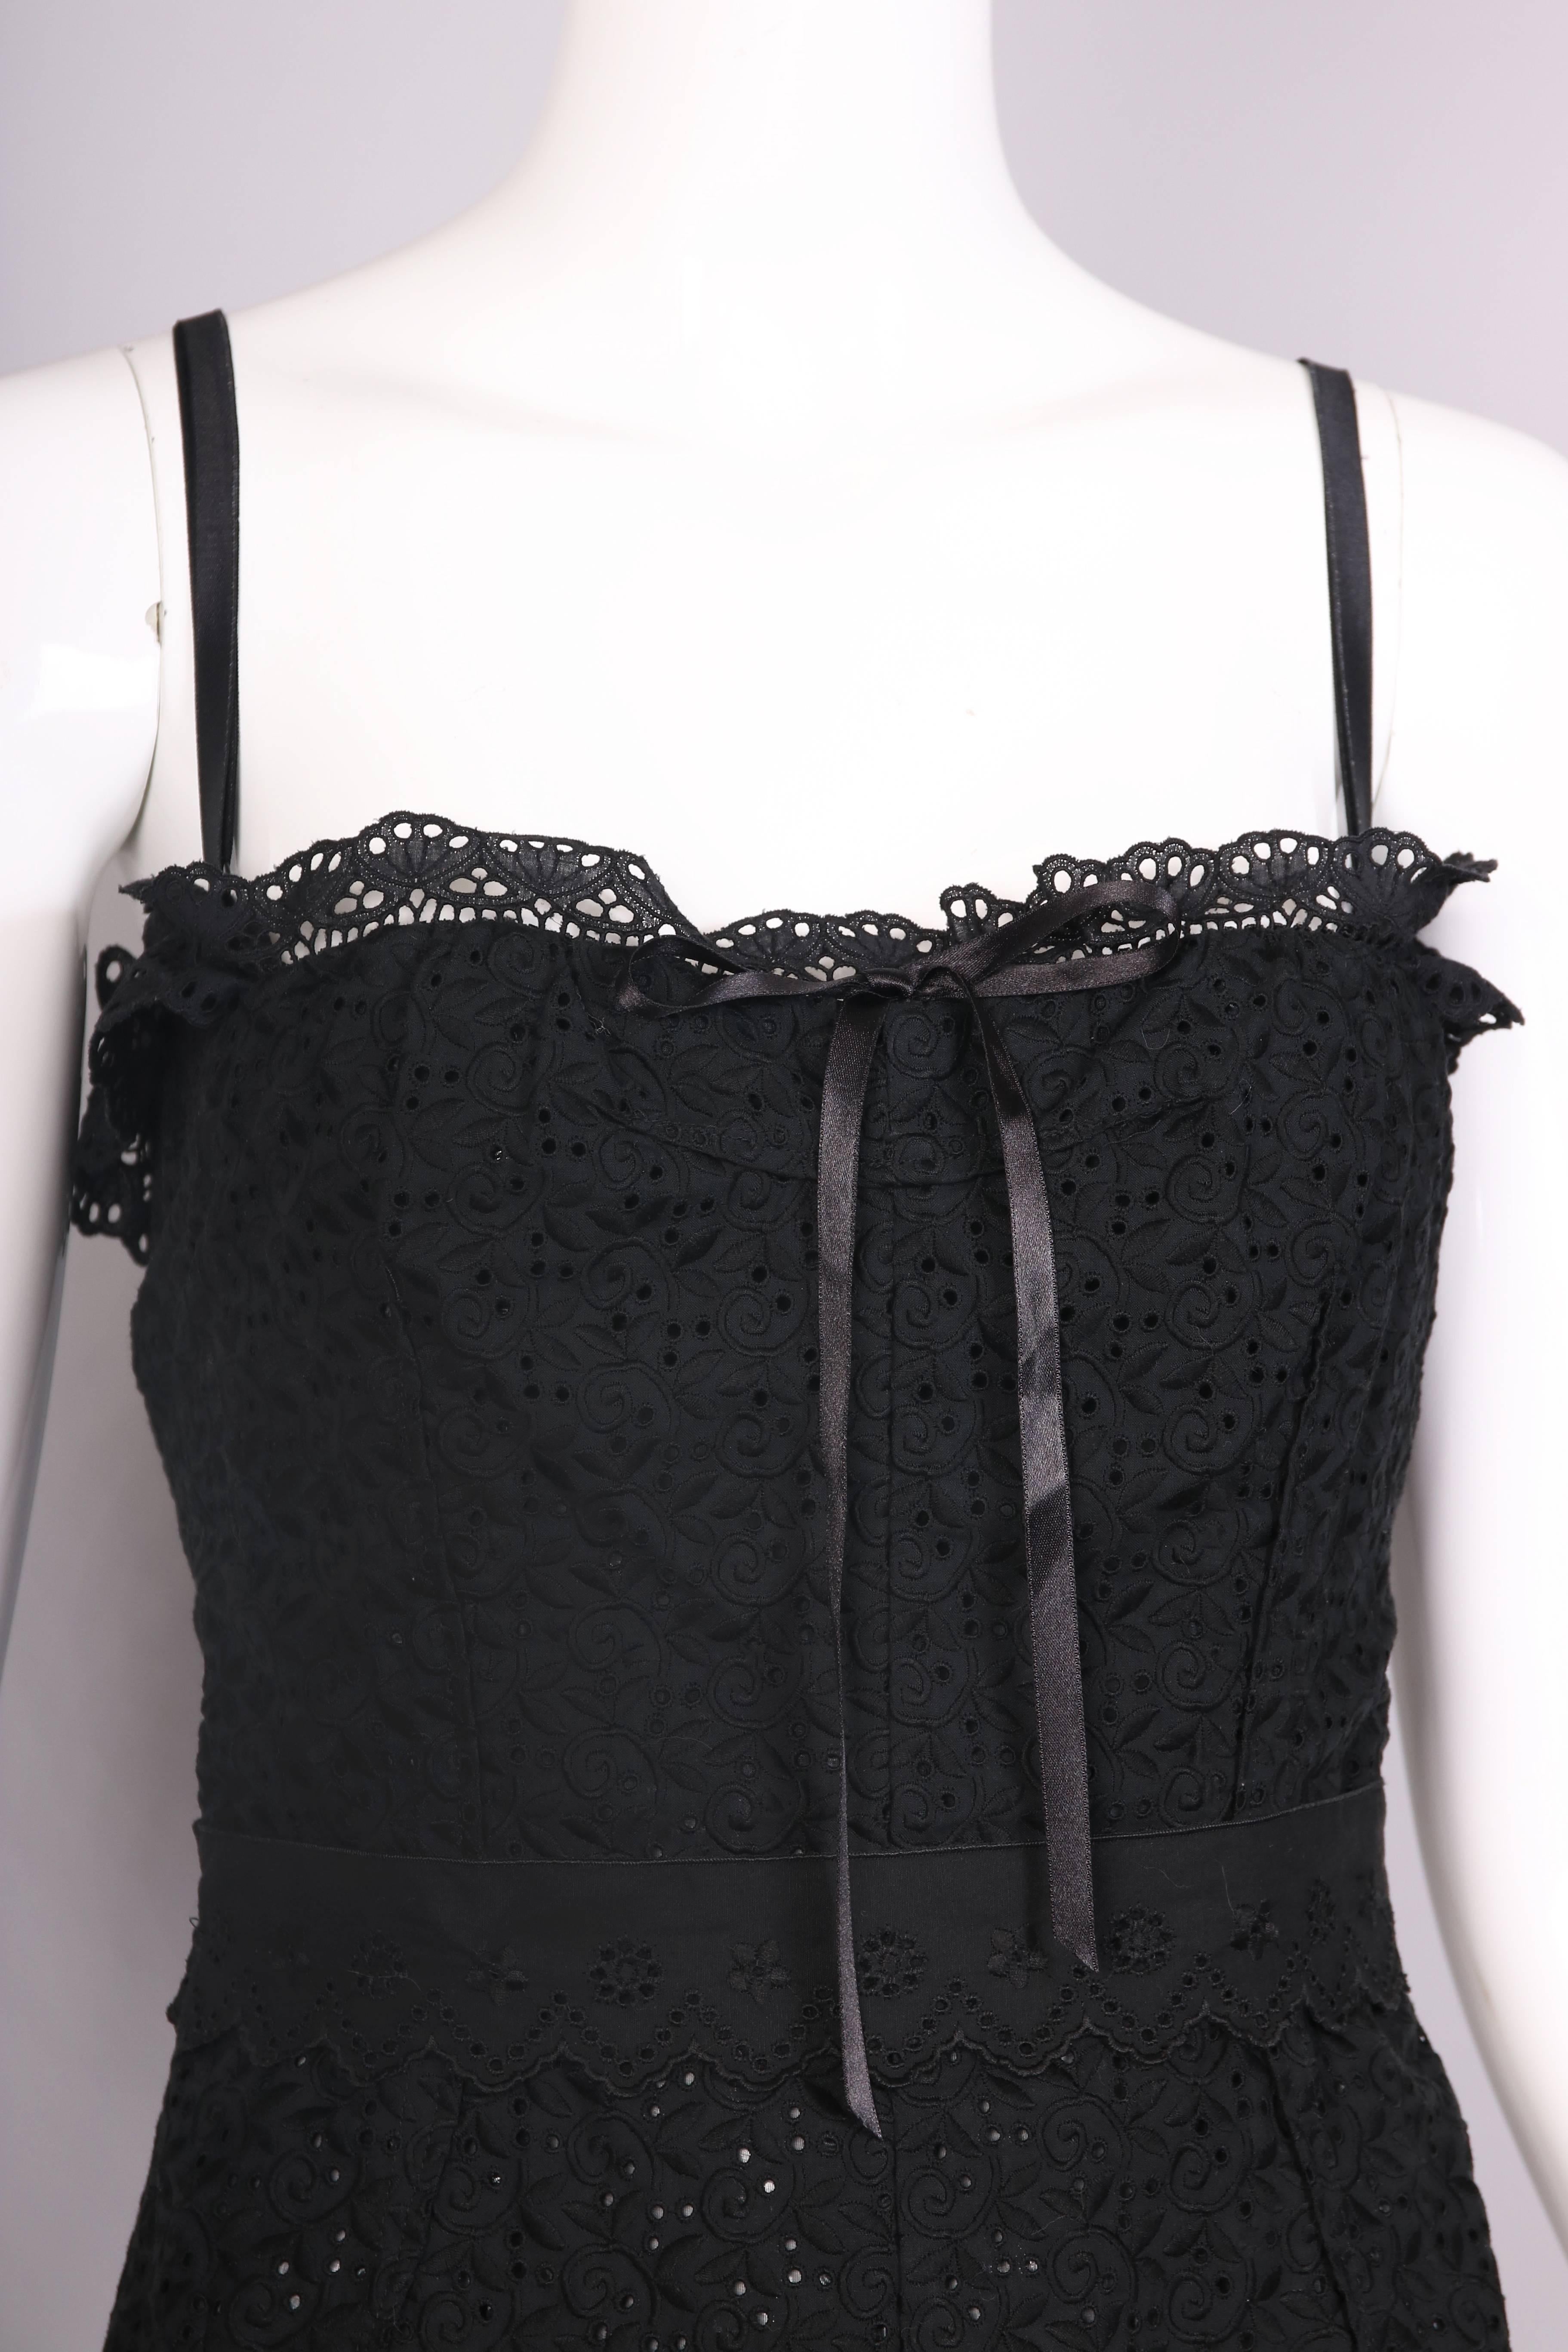 Dolce & Gabbana Black Eyelet Lace Bustier Dress W/Ruffle Hem In Excellent Condition For Sale In Studio City, CA